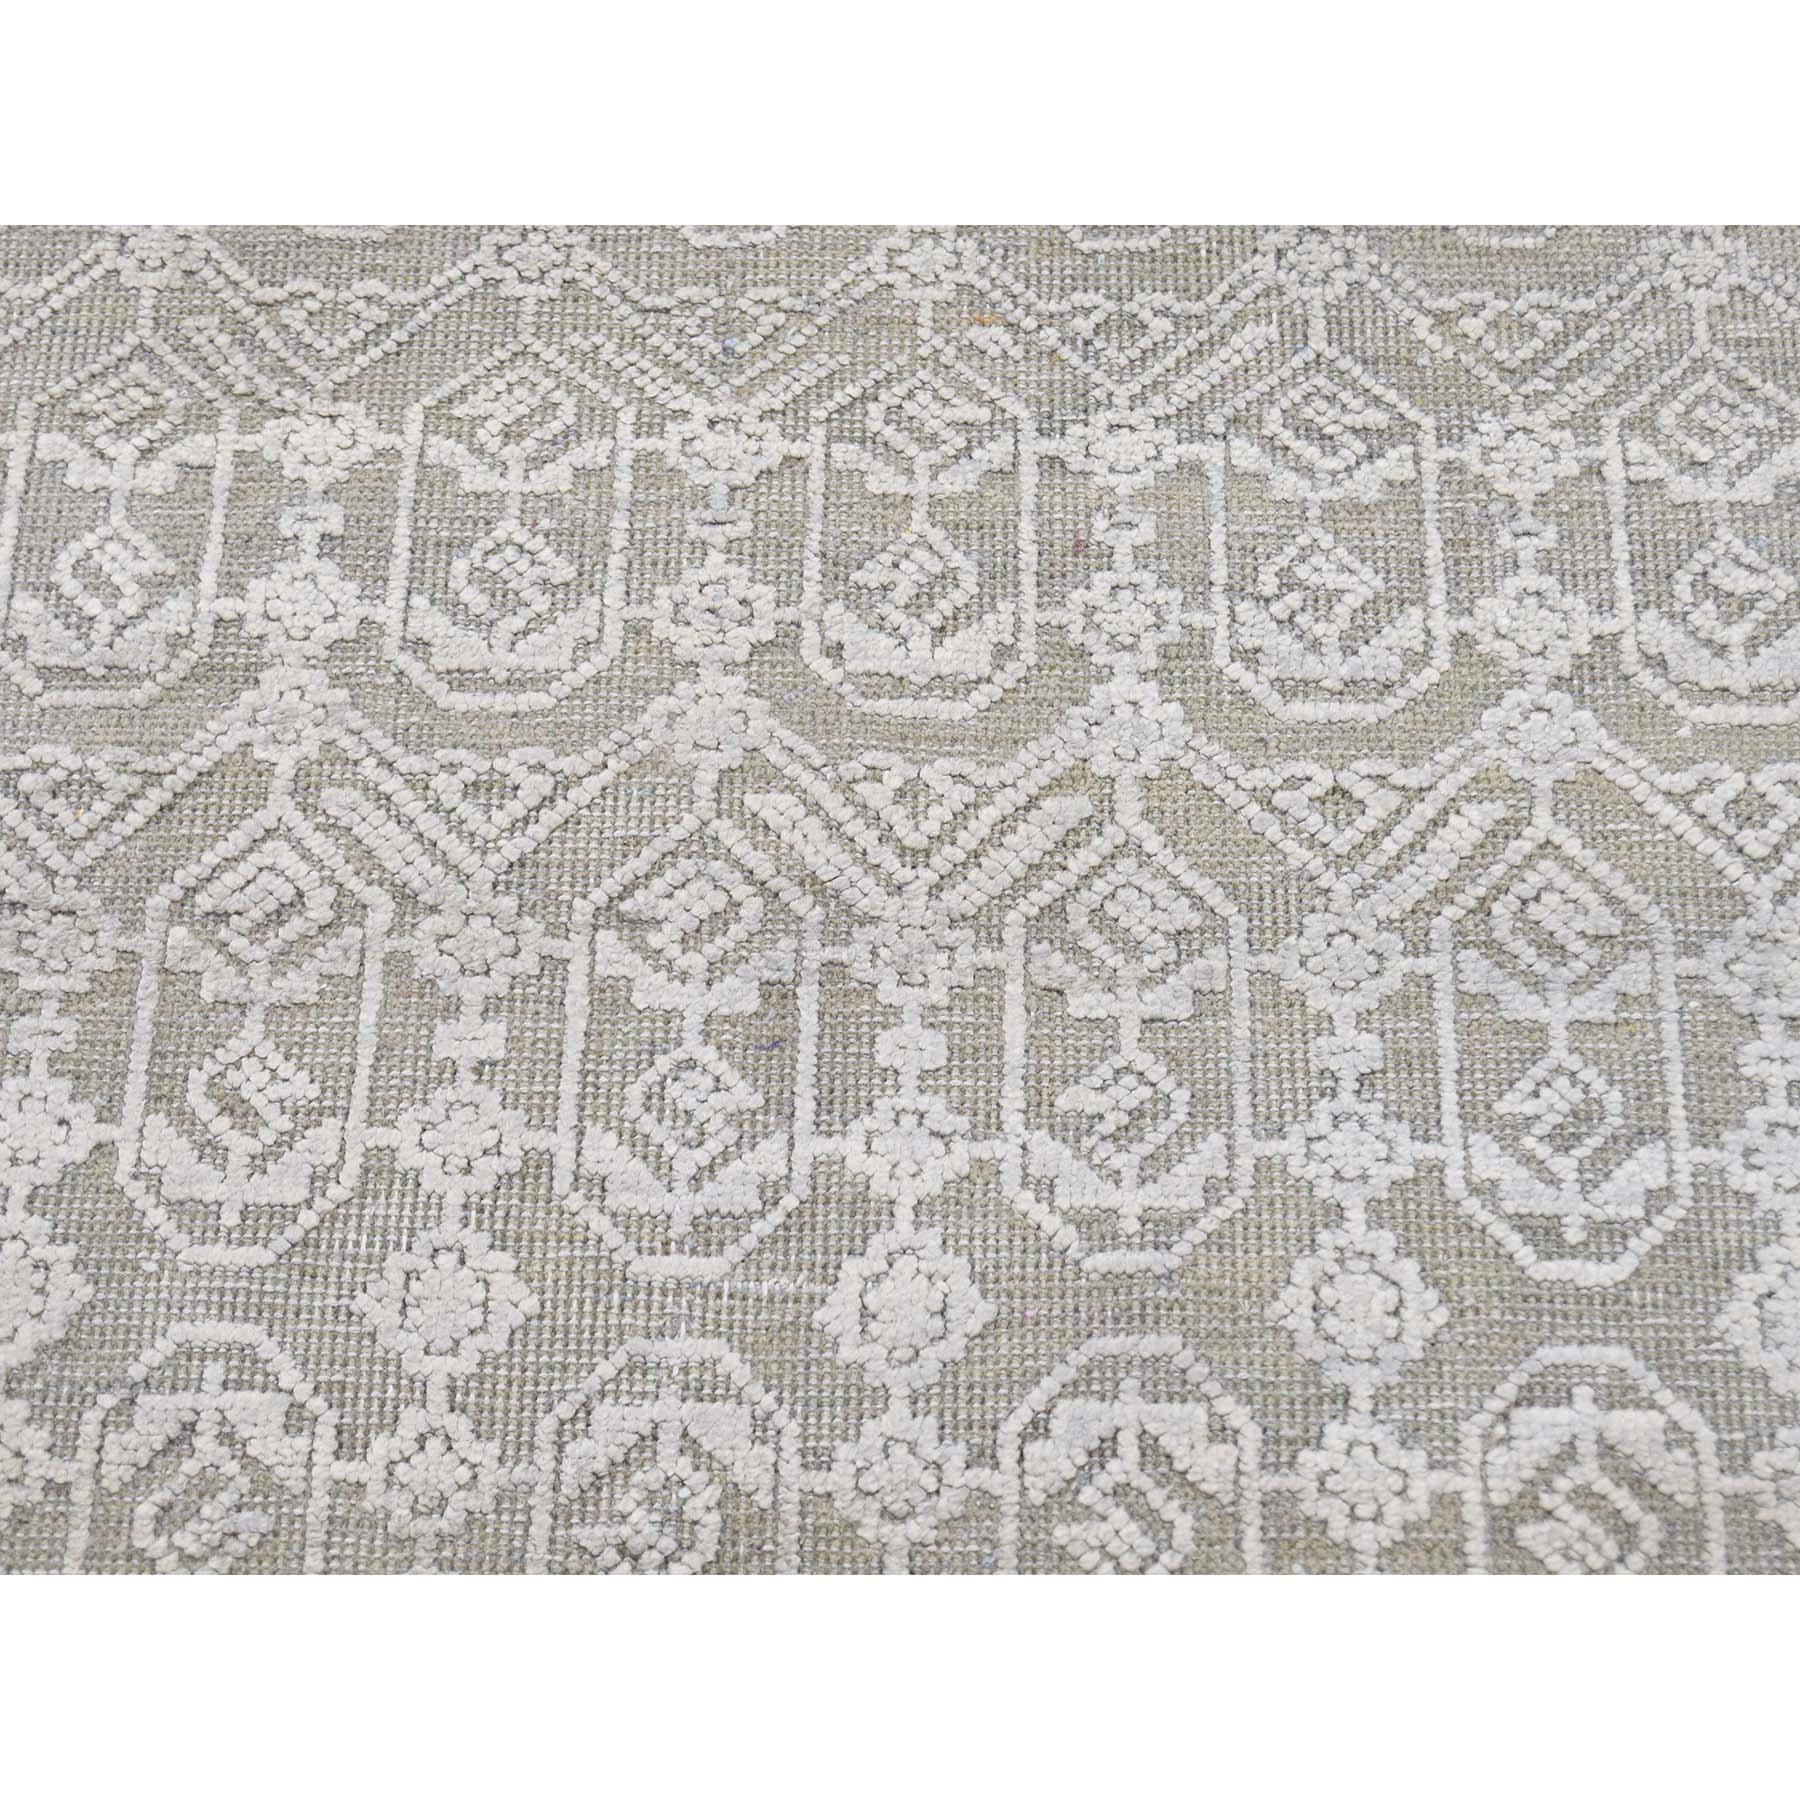 6-x9-1  Pure Silk Oxidized Wool Tone On Tone Hand-Knotted Oriental Rug 